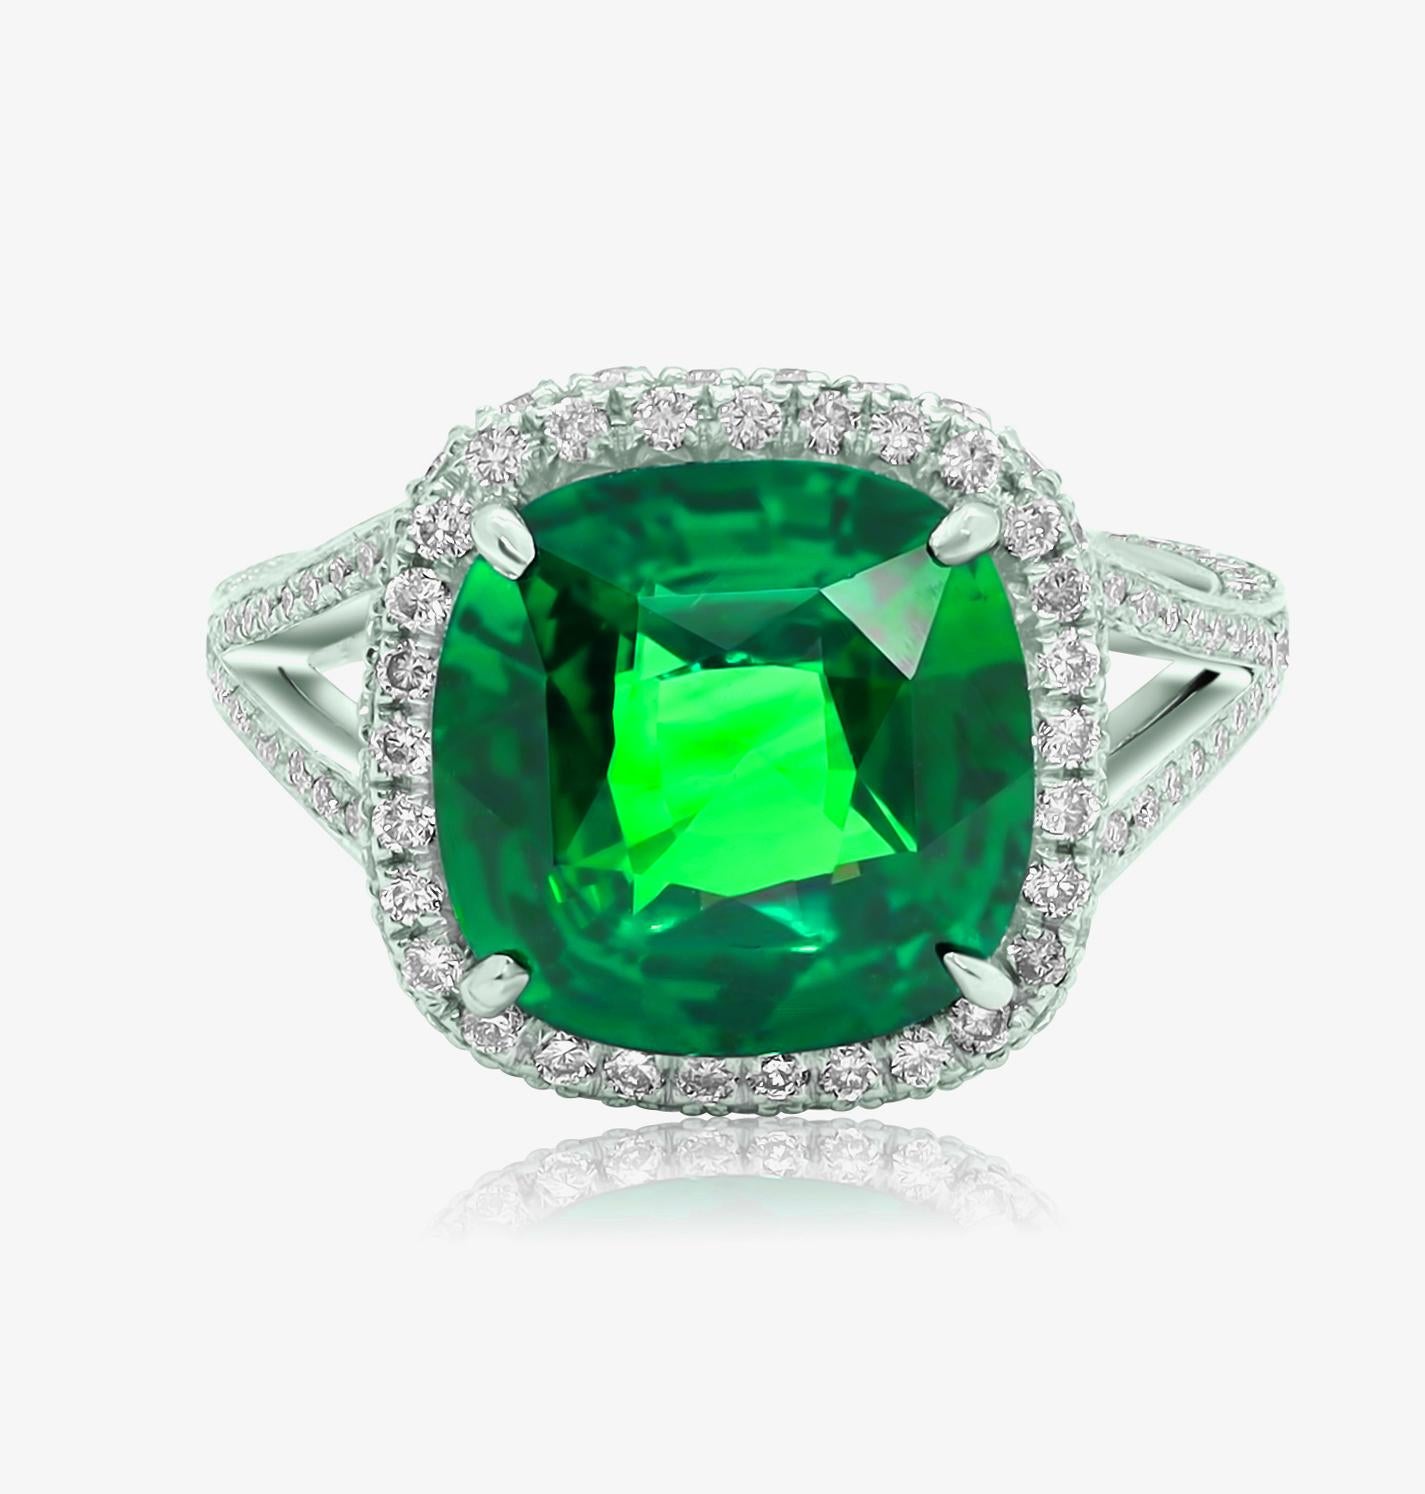 18 kt white gold emerald diamond ring featuring a 6.63 ct natural cushion cut green emerald with 1.50 cts tw of micropave round diamonds in a halo setting.
Diana M. is a leading supplier of top-quality fine jewelry for over 35 years.
Diana M is